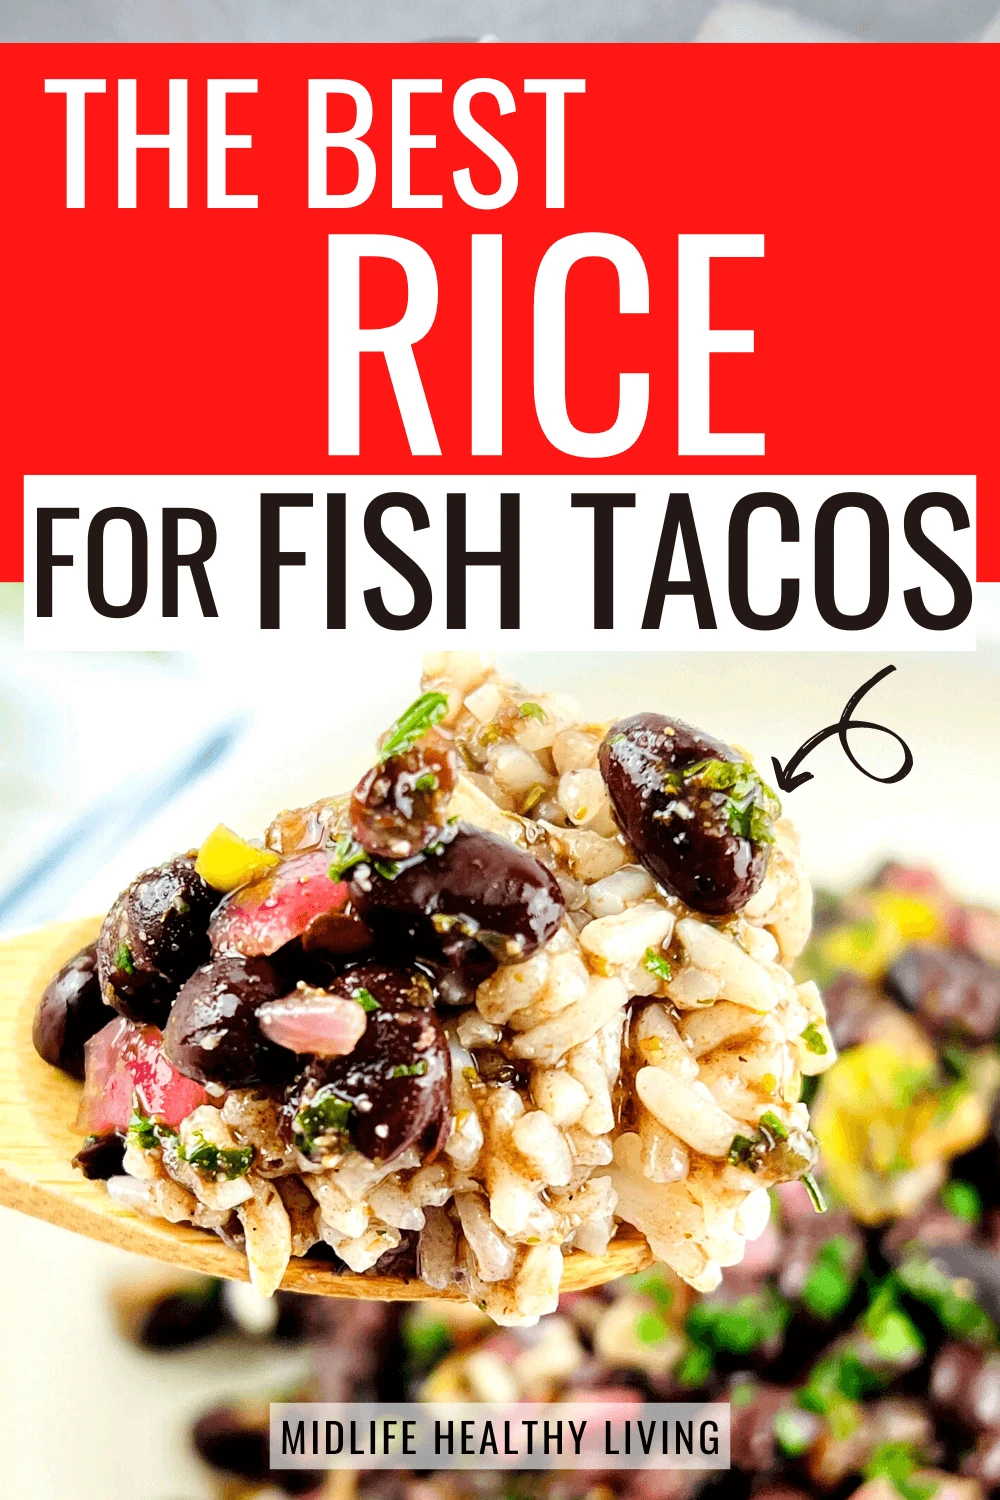 https://www.midlifehealthyliving.com/wp-content/uploads/2023/02/best-rice-for-fish-tacos.png.webp